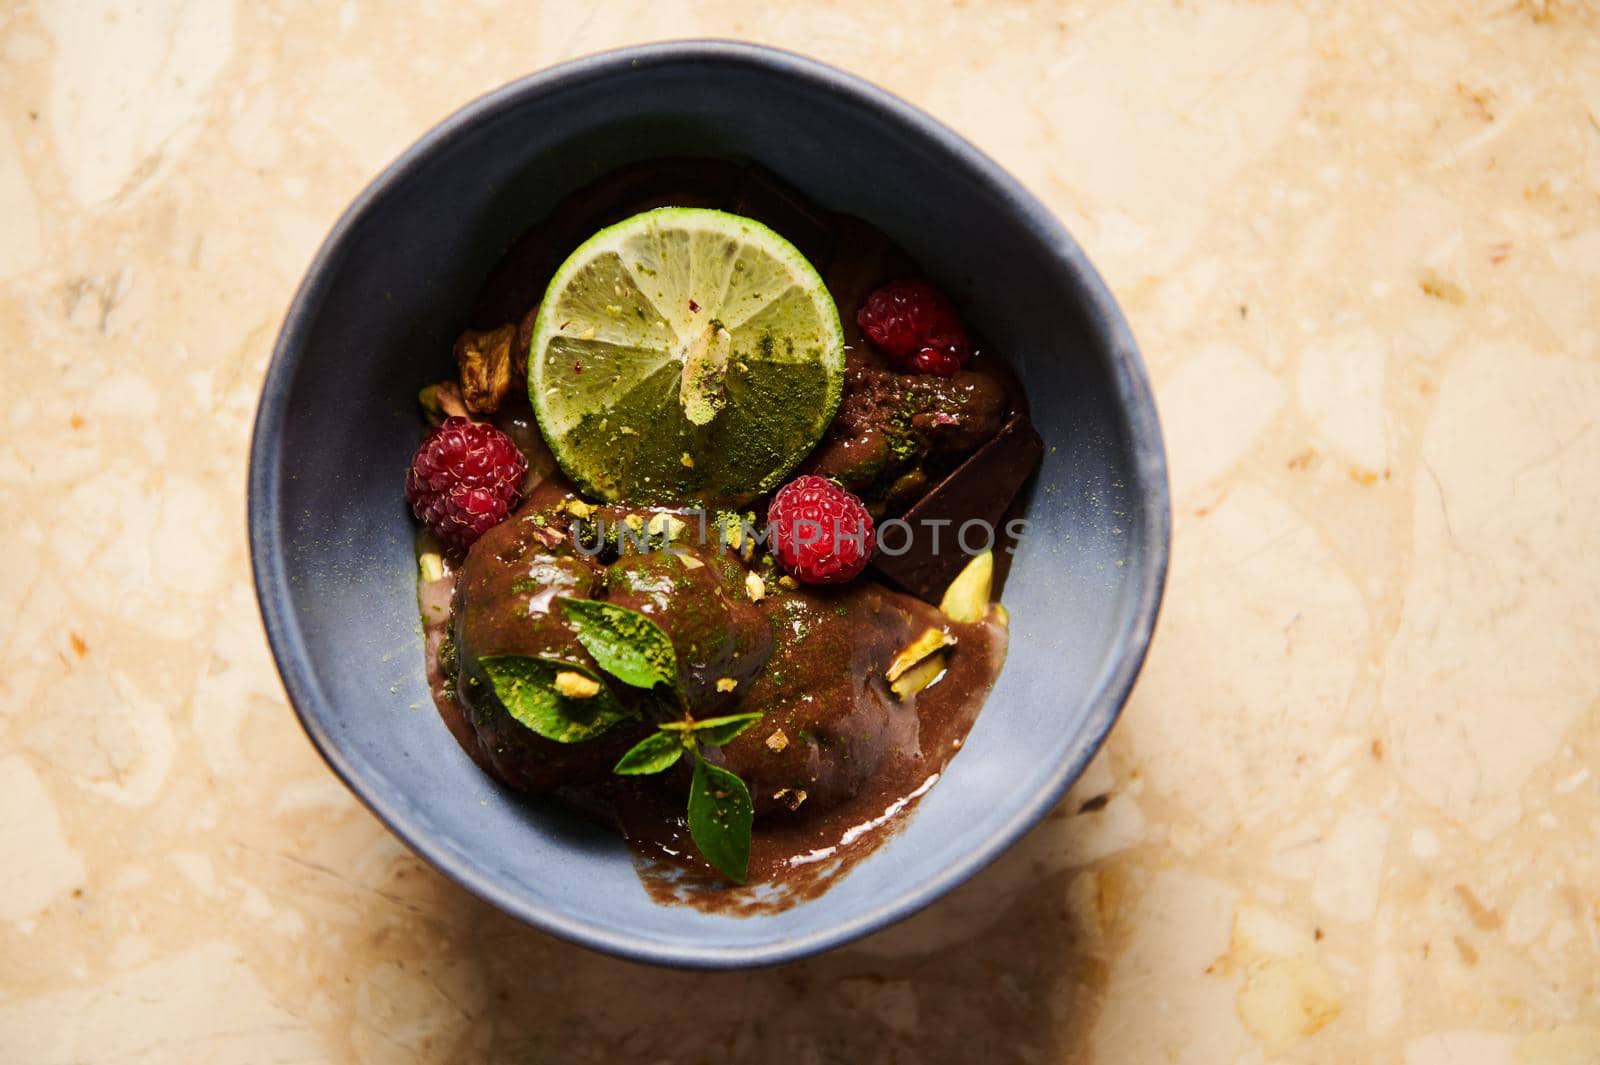 Selective focus on a slice of juicy lime, garnishing a chocolate ice cream, topped with organic cocoa, raspberries and lemon basil leaves, melting in navy blue bowl. Flat lay Still life